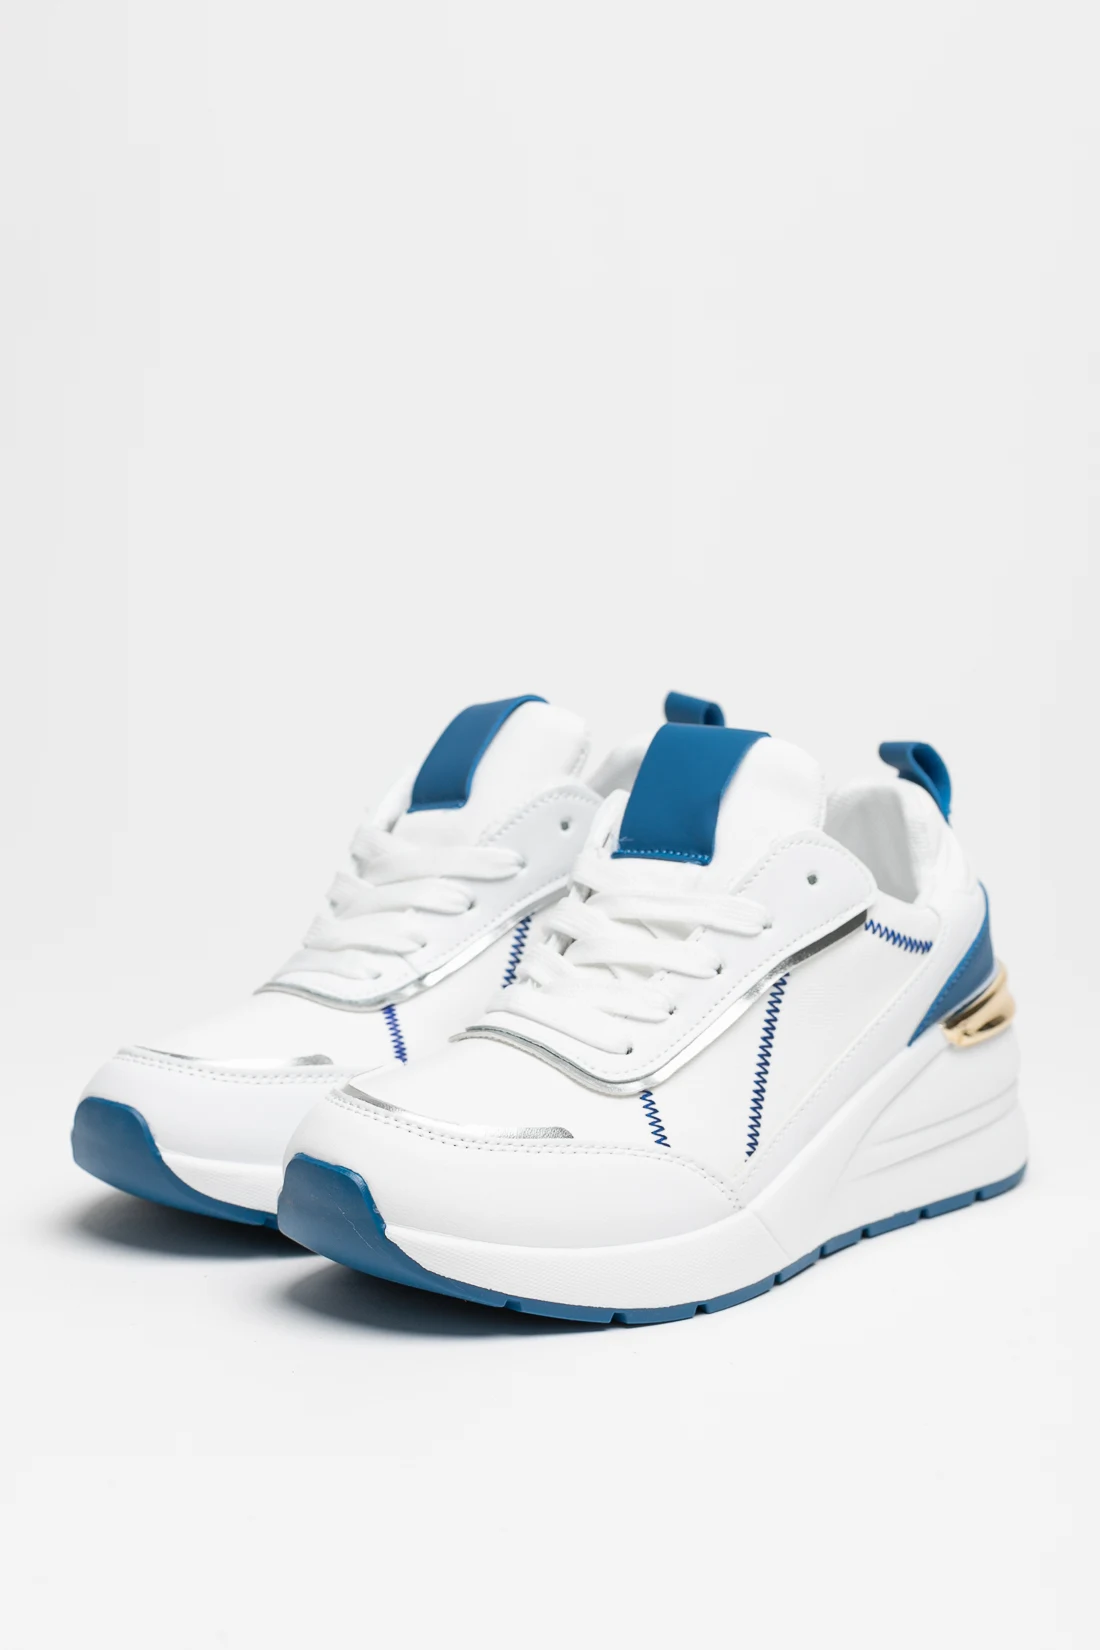 NIDOR CASUAL SNEAKERS - WHITE/BLUE